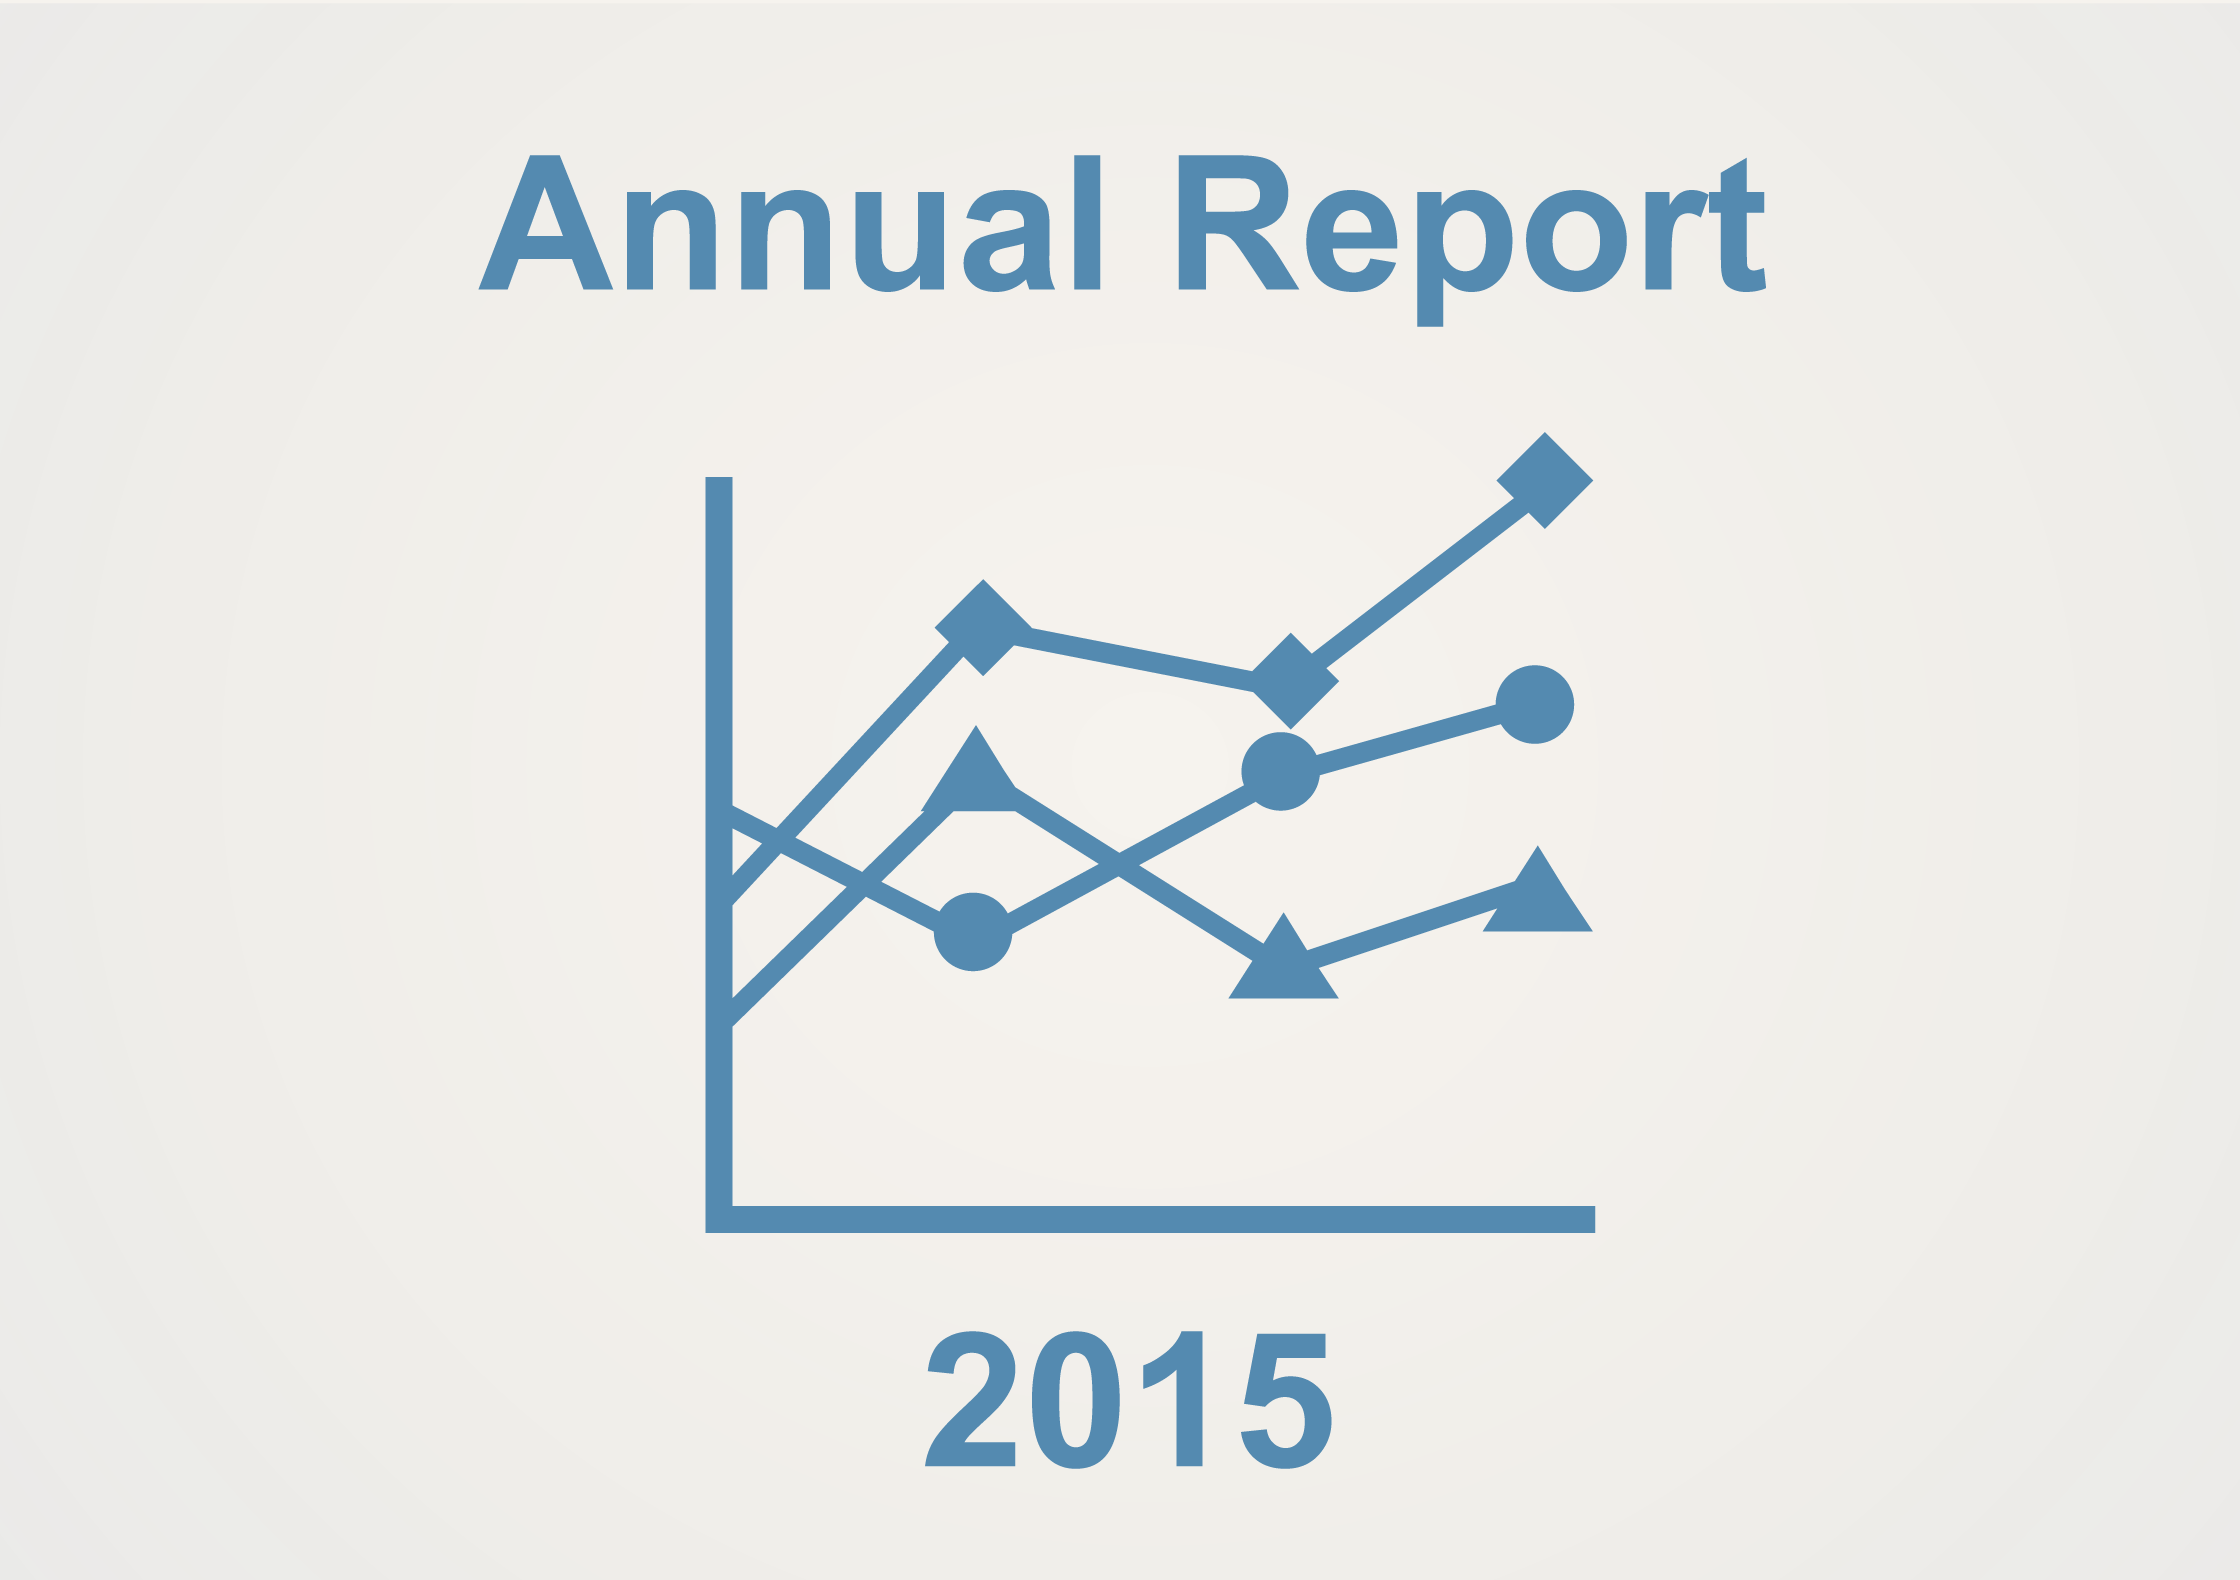 Blue line graph with text Annual Report 2015